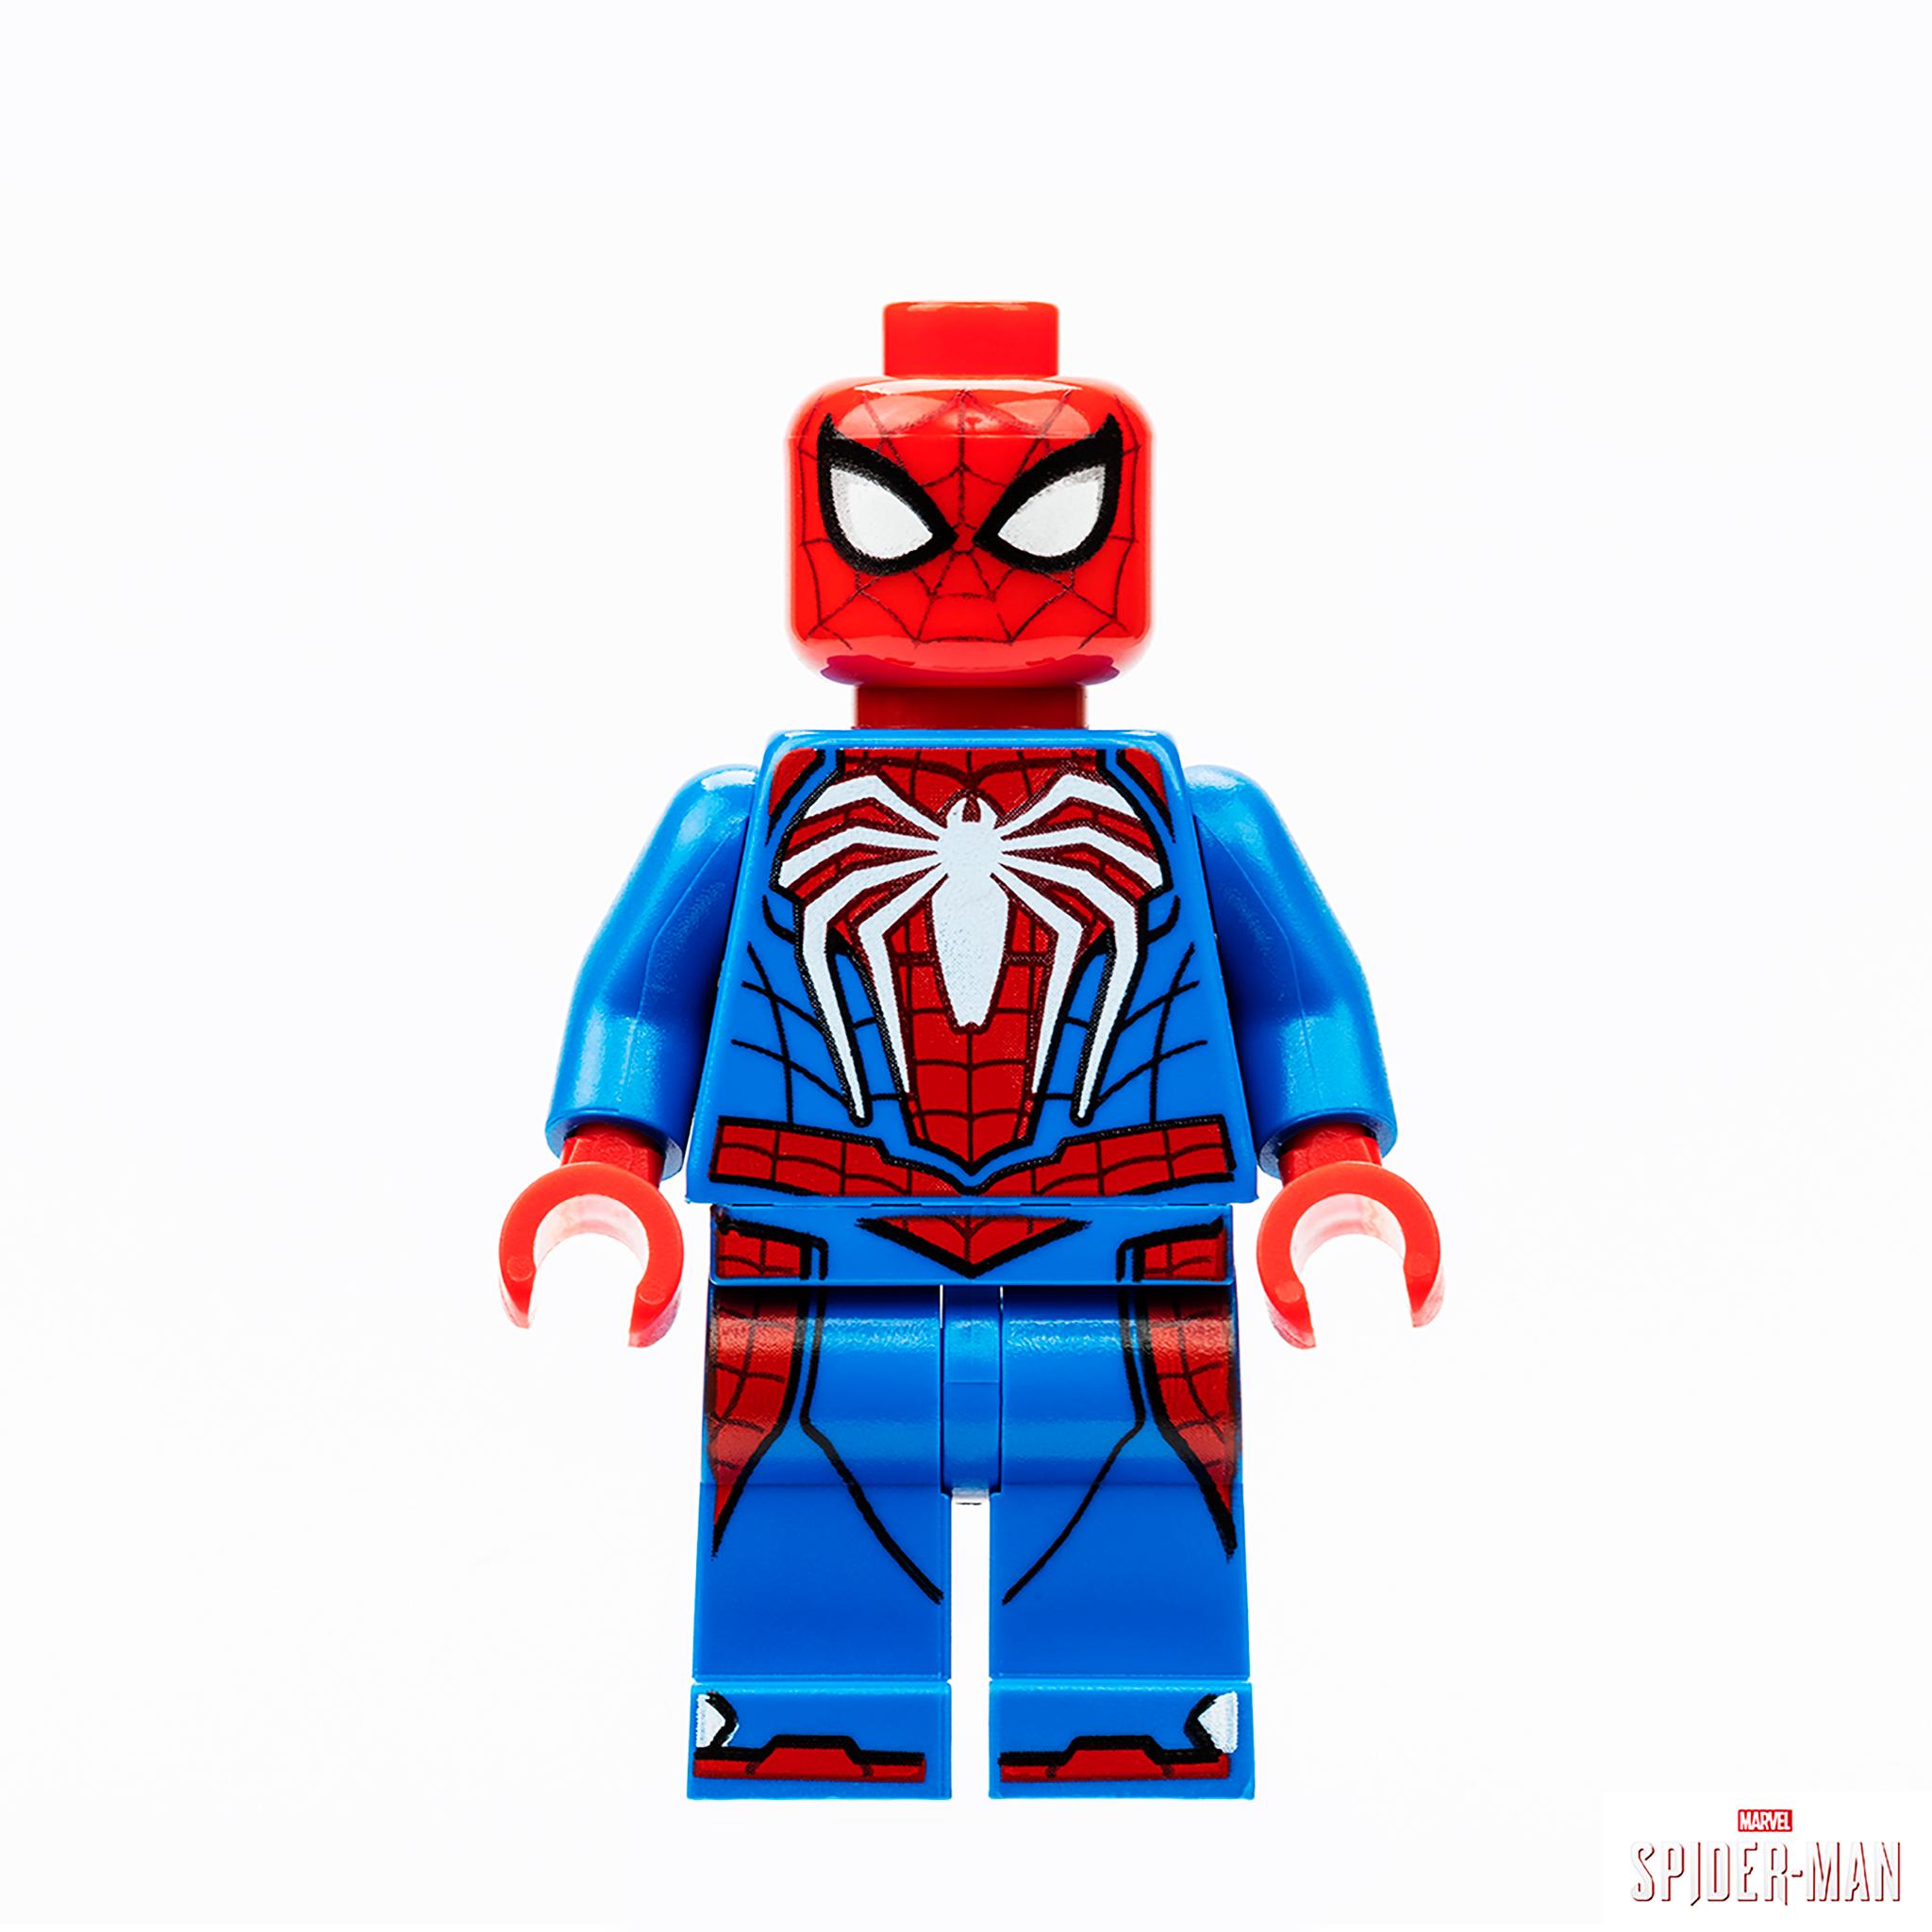 Playstation 4 S Spider Man Is The First Revealed Sdcc Lego Minifigure Exclusive Fbtb